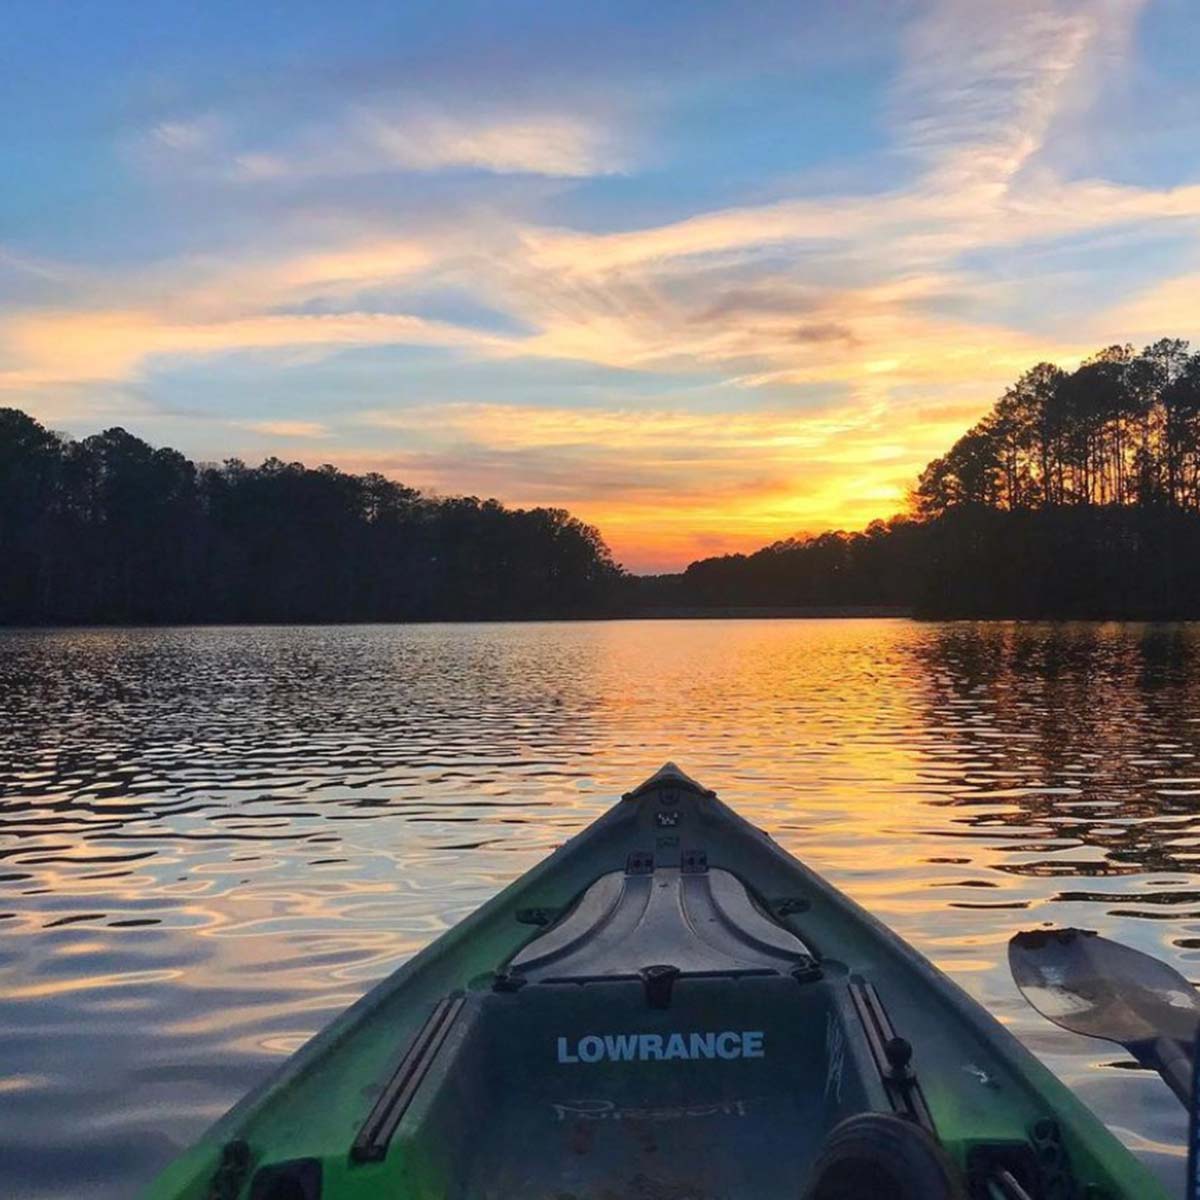 A sunset, taken from a kayak, on West Point Lake.